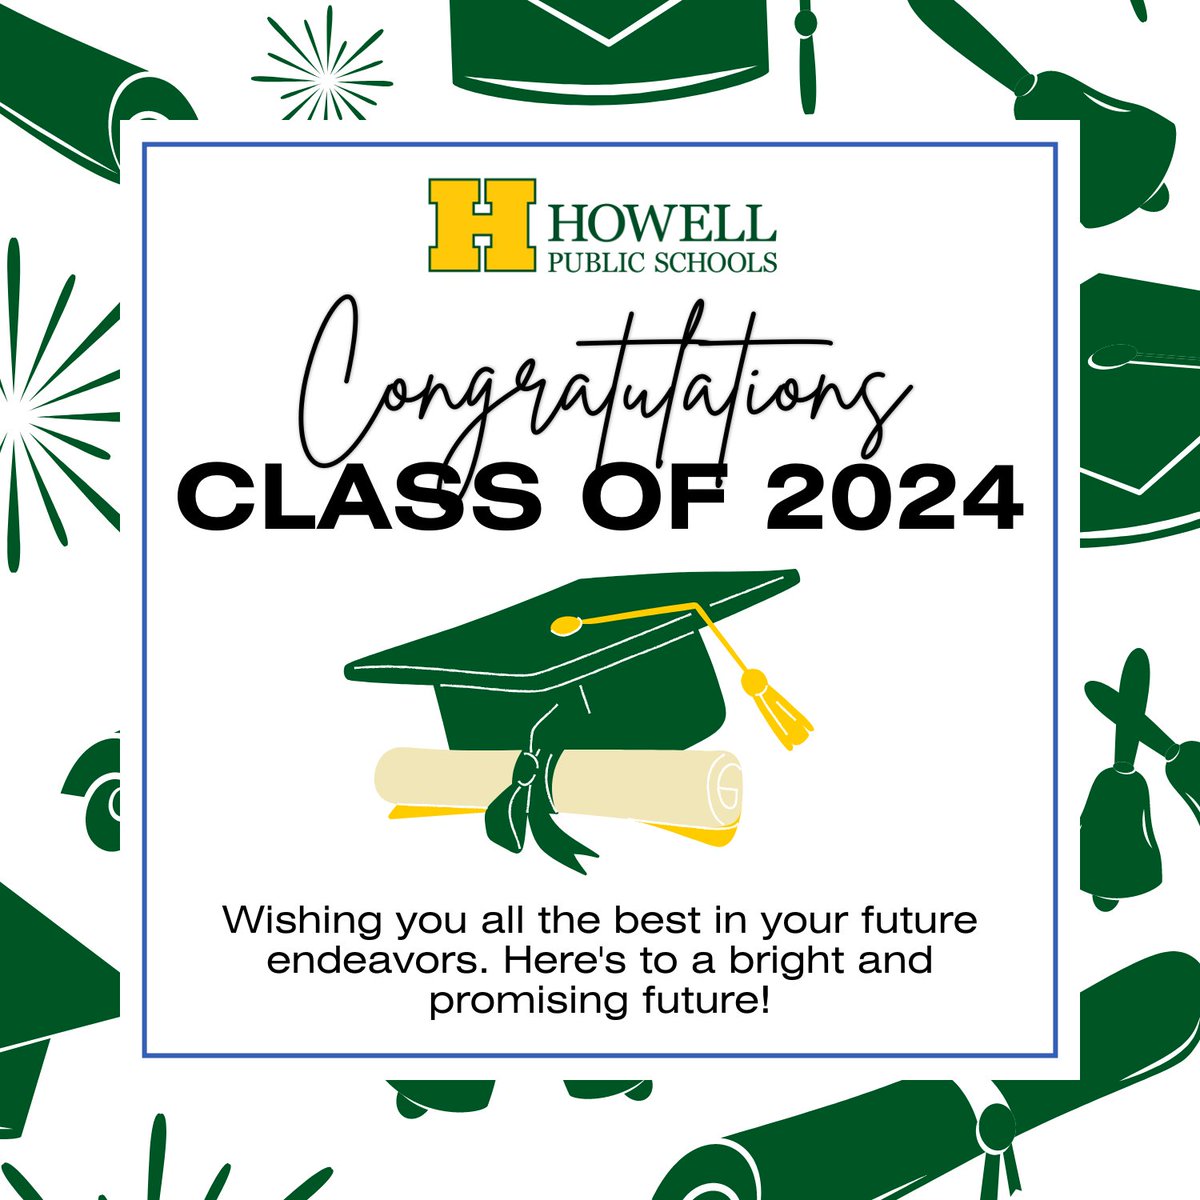 Today, we will celebrate the Howell High School Class of 2024 during their graduation ceremony at the MSU Breslin Center. Doors open at 4 p.m., and the ceremony will begin at 5 p.m. The ceremony will also be live-streamed at HowellSchools.com/Graduation. #HighlanderNation